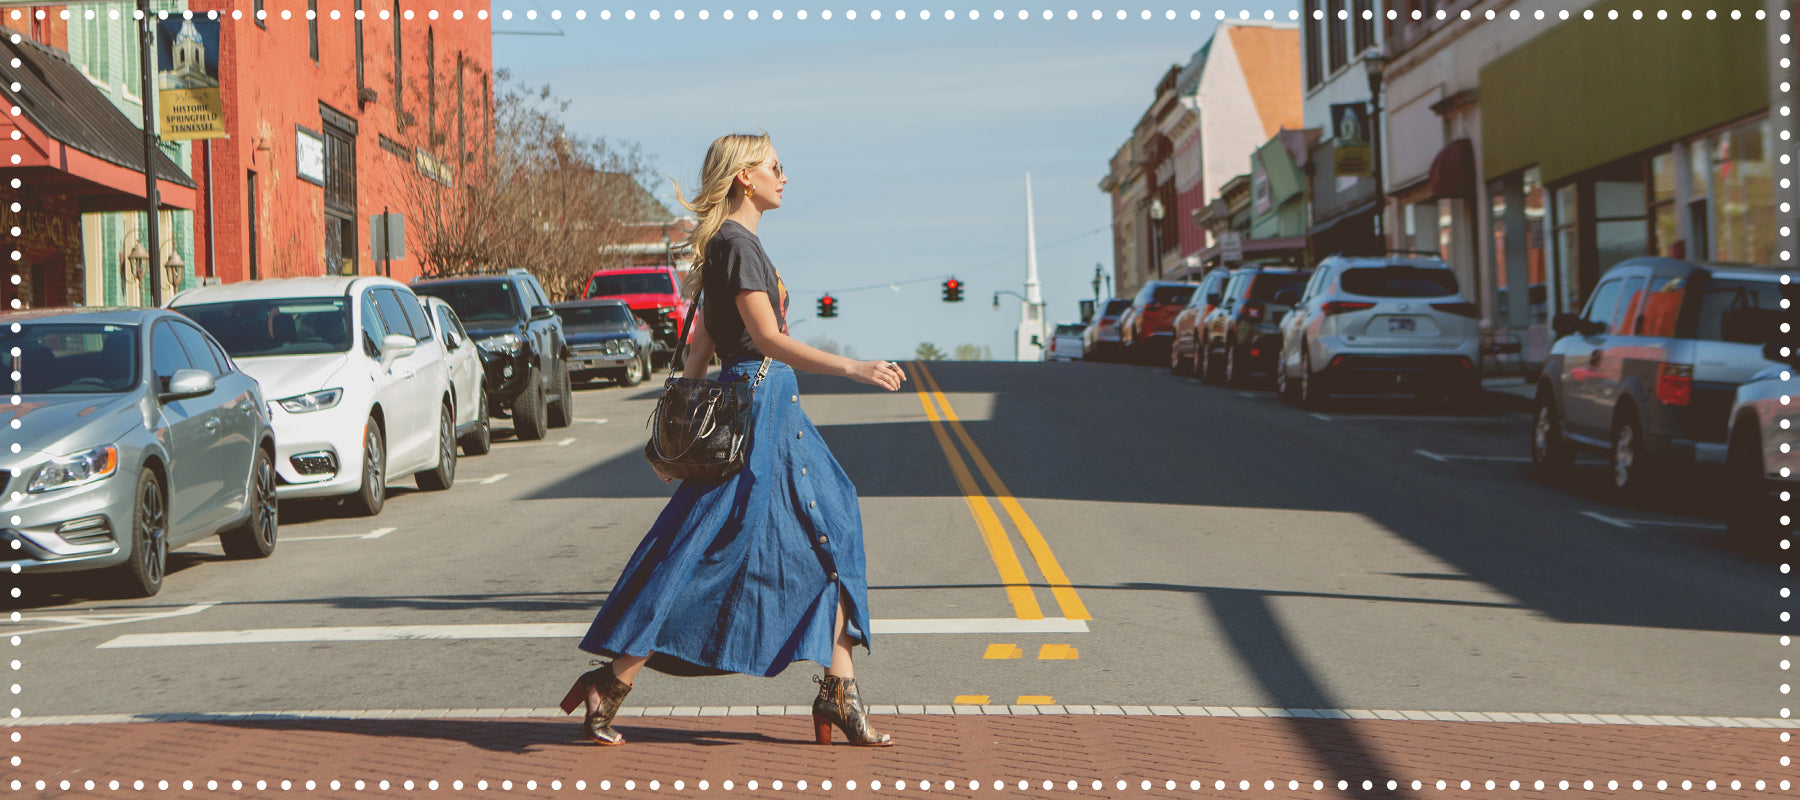 A woman crossing a street in a small town, wearing a denim skirt and carrying a backpack, with cars parked along the roadside.